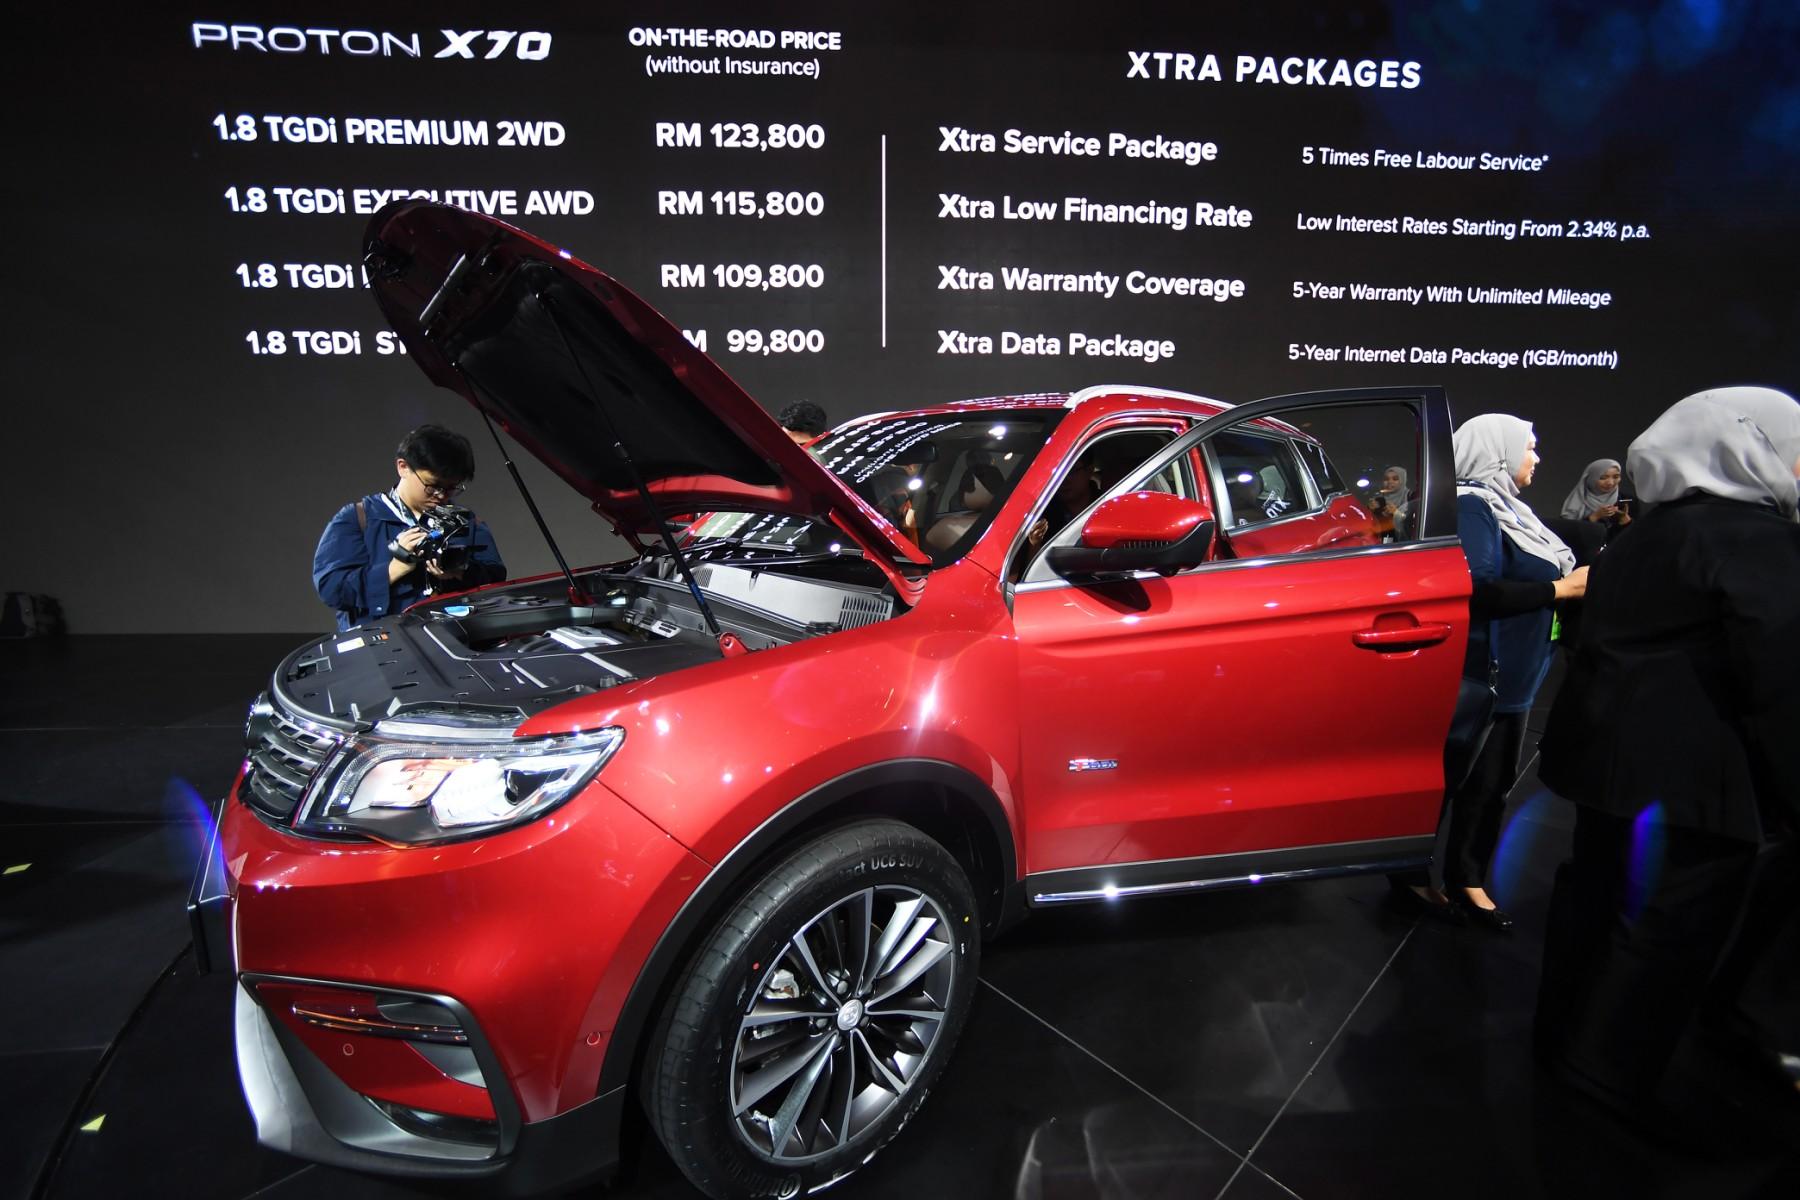 People look at the 2019 Proton X70 SUV during the official launching ceremony in Kuala Lumpur on Dec 12, 2018. While Proton appears to have benefited from its partnership with Geely, automotive experts say there is more for the national carmaker to tap. Photo: AFP